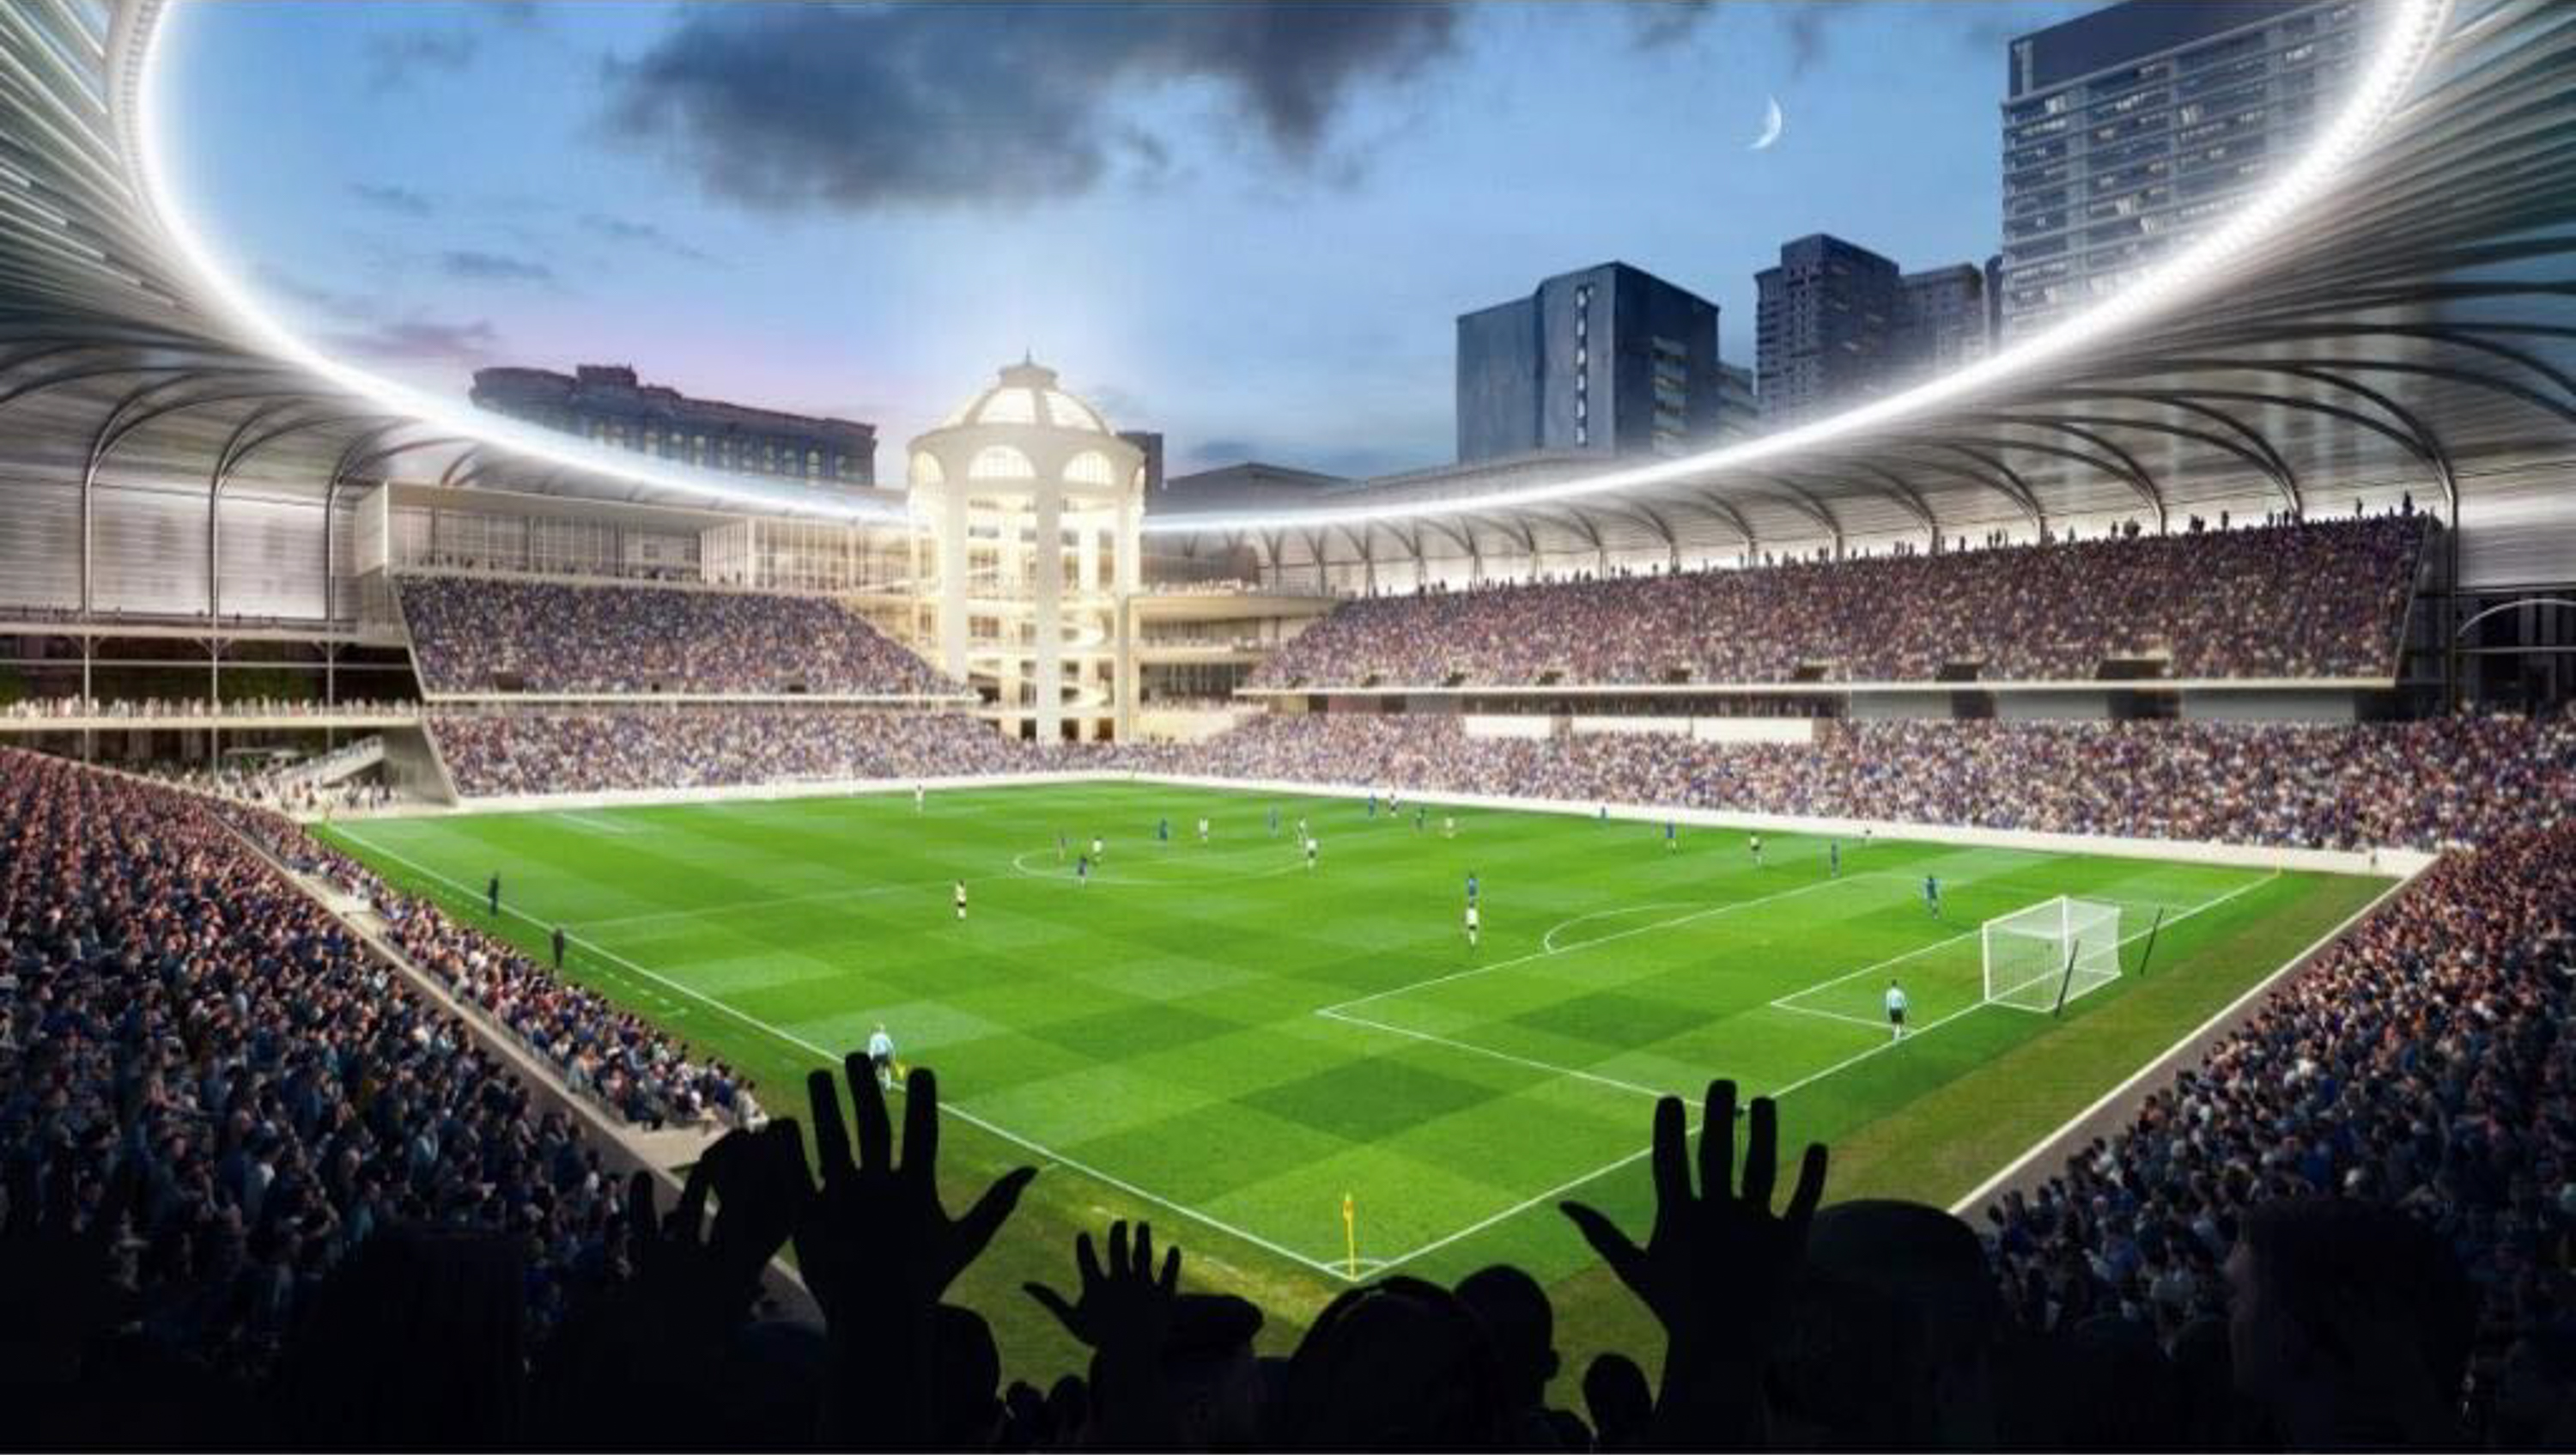 Downtown San Francisco Soccer Stadium Plans for Former Westfield Mall Revealed